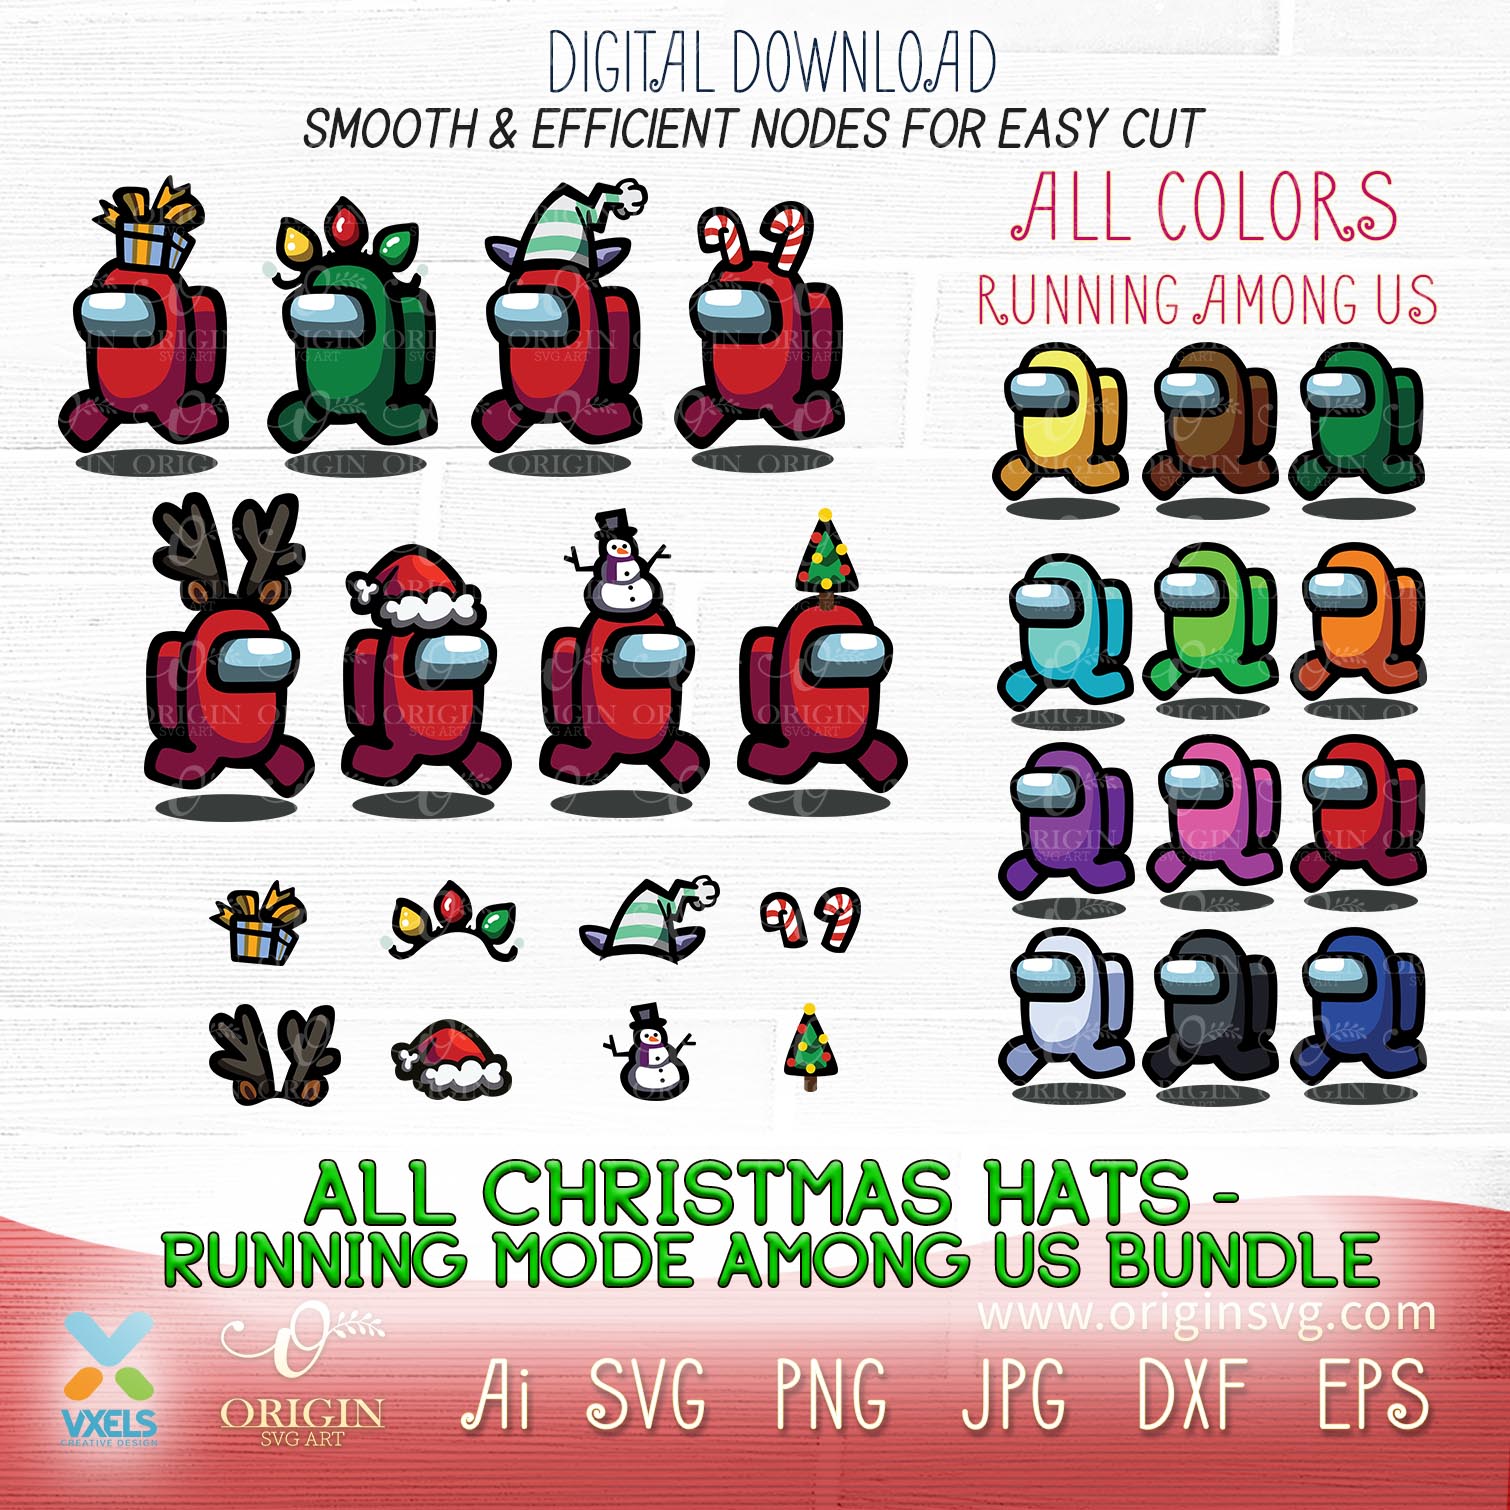 Download All Christmas Among Us with Hats character colors Running version SVG